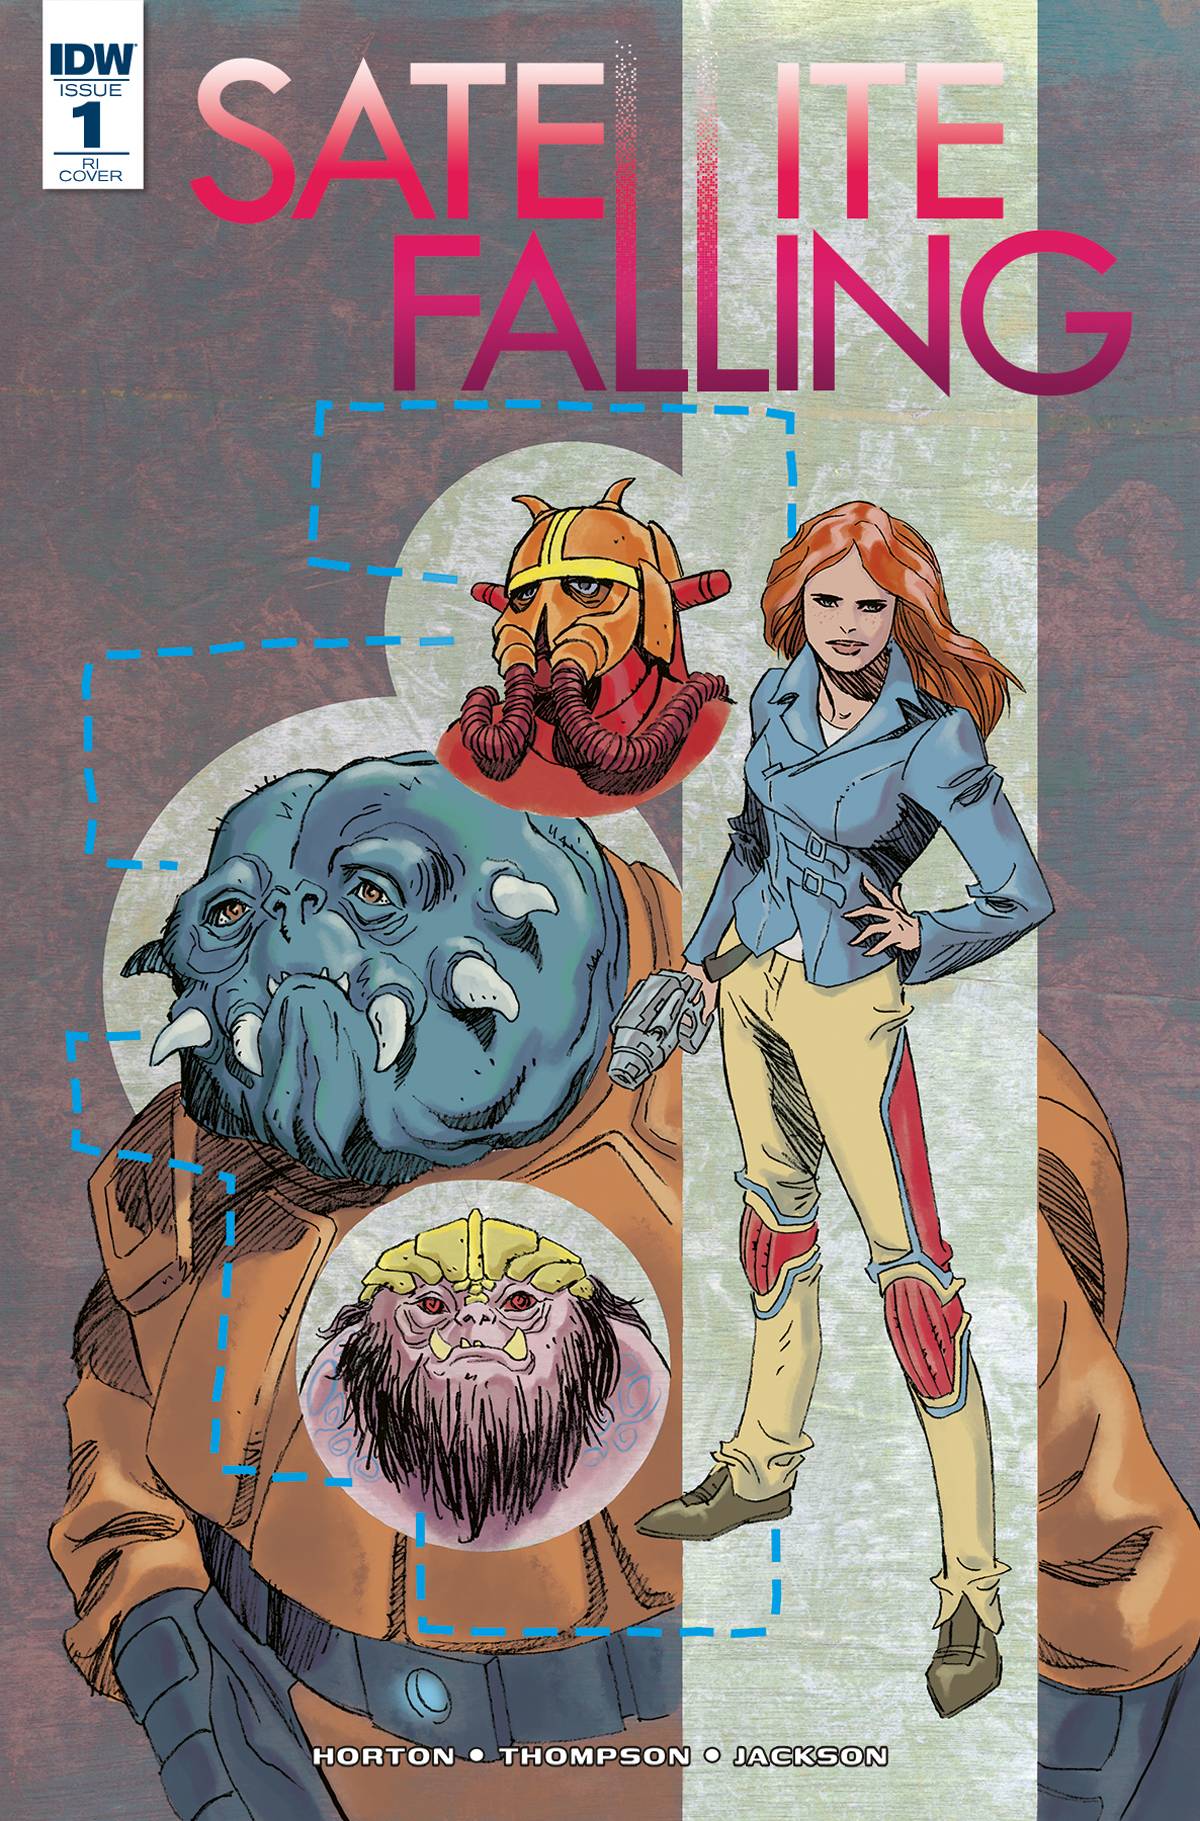 Satellite Falling #1 1 for 10 Incentive